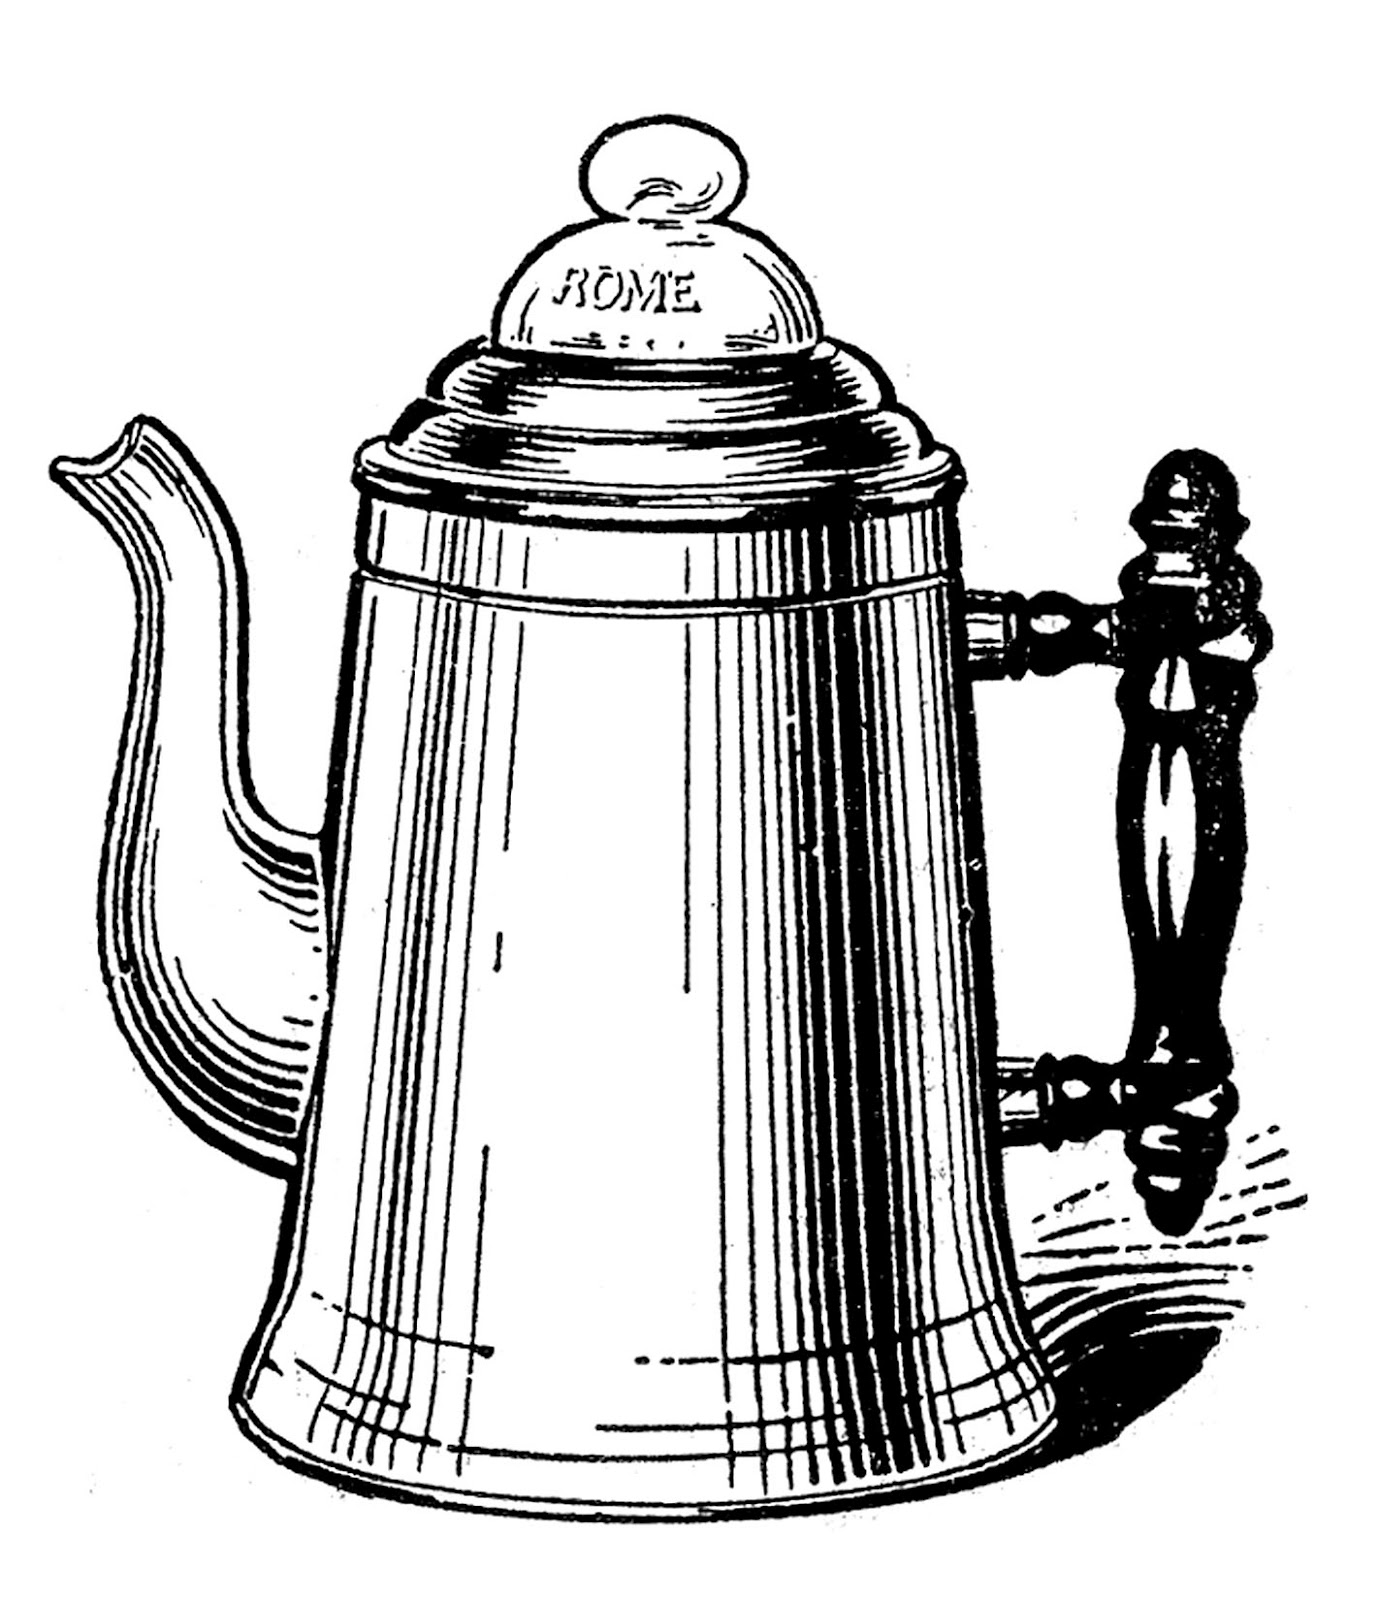 Vintage Kitchen Clip Art - Tea Kettle and Coffee Pots - The 